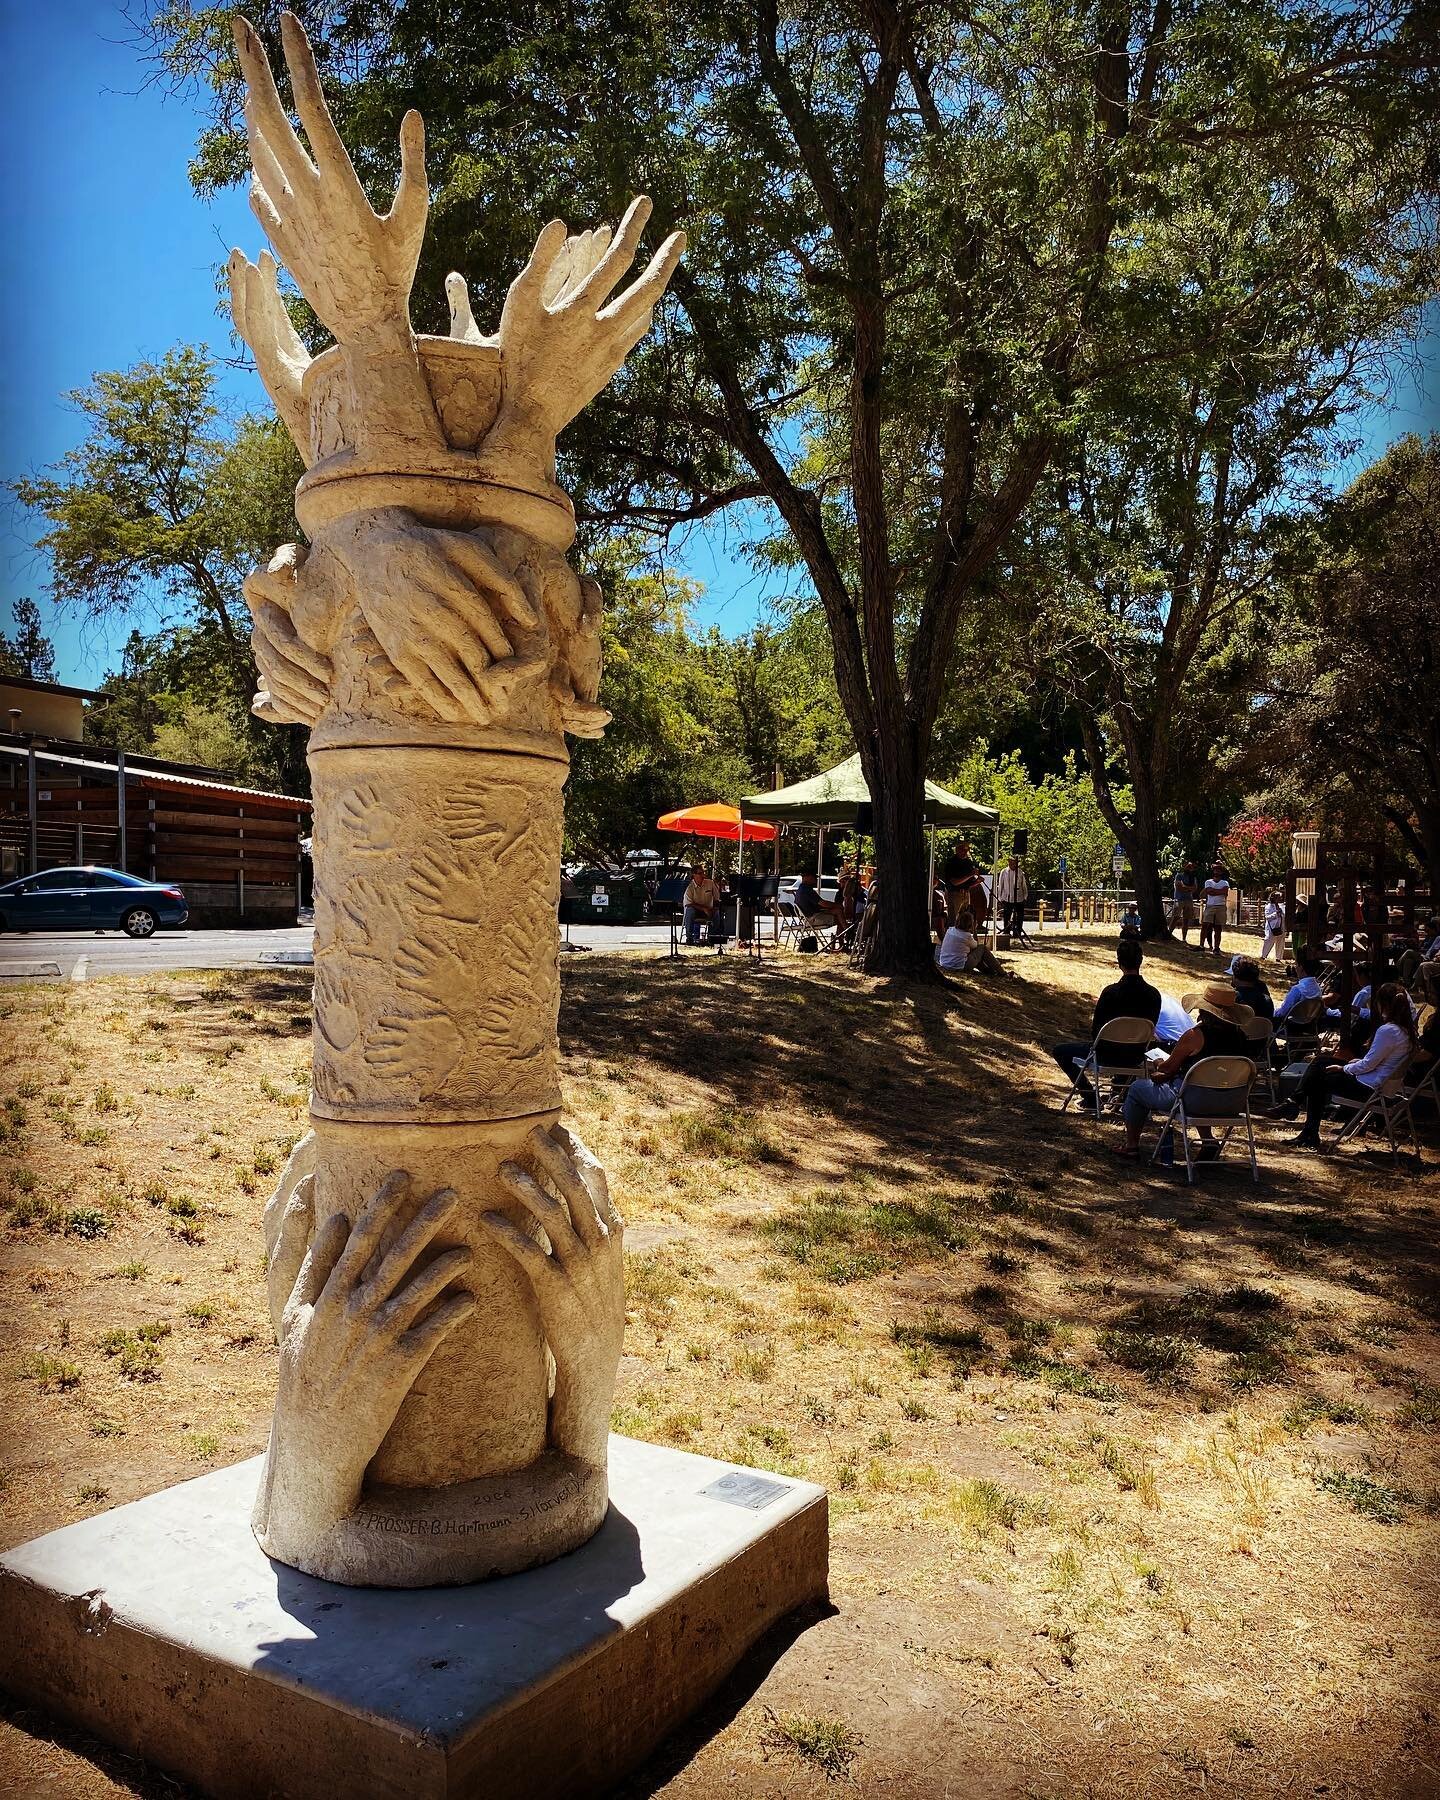 We're excited to see this project come to fruition: the Sebastopol Community Sculpture Garden! This has been in the works for years as part of Ives Park master plan, and the Public Art Committee has made it happen. Public service has always been a co